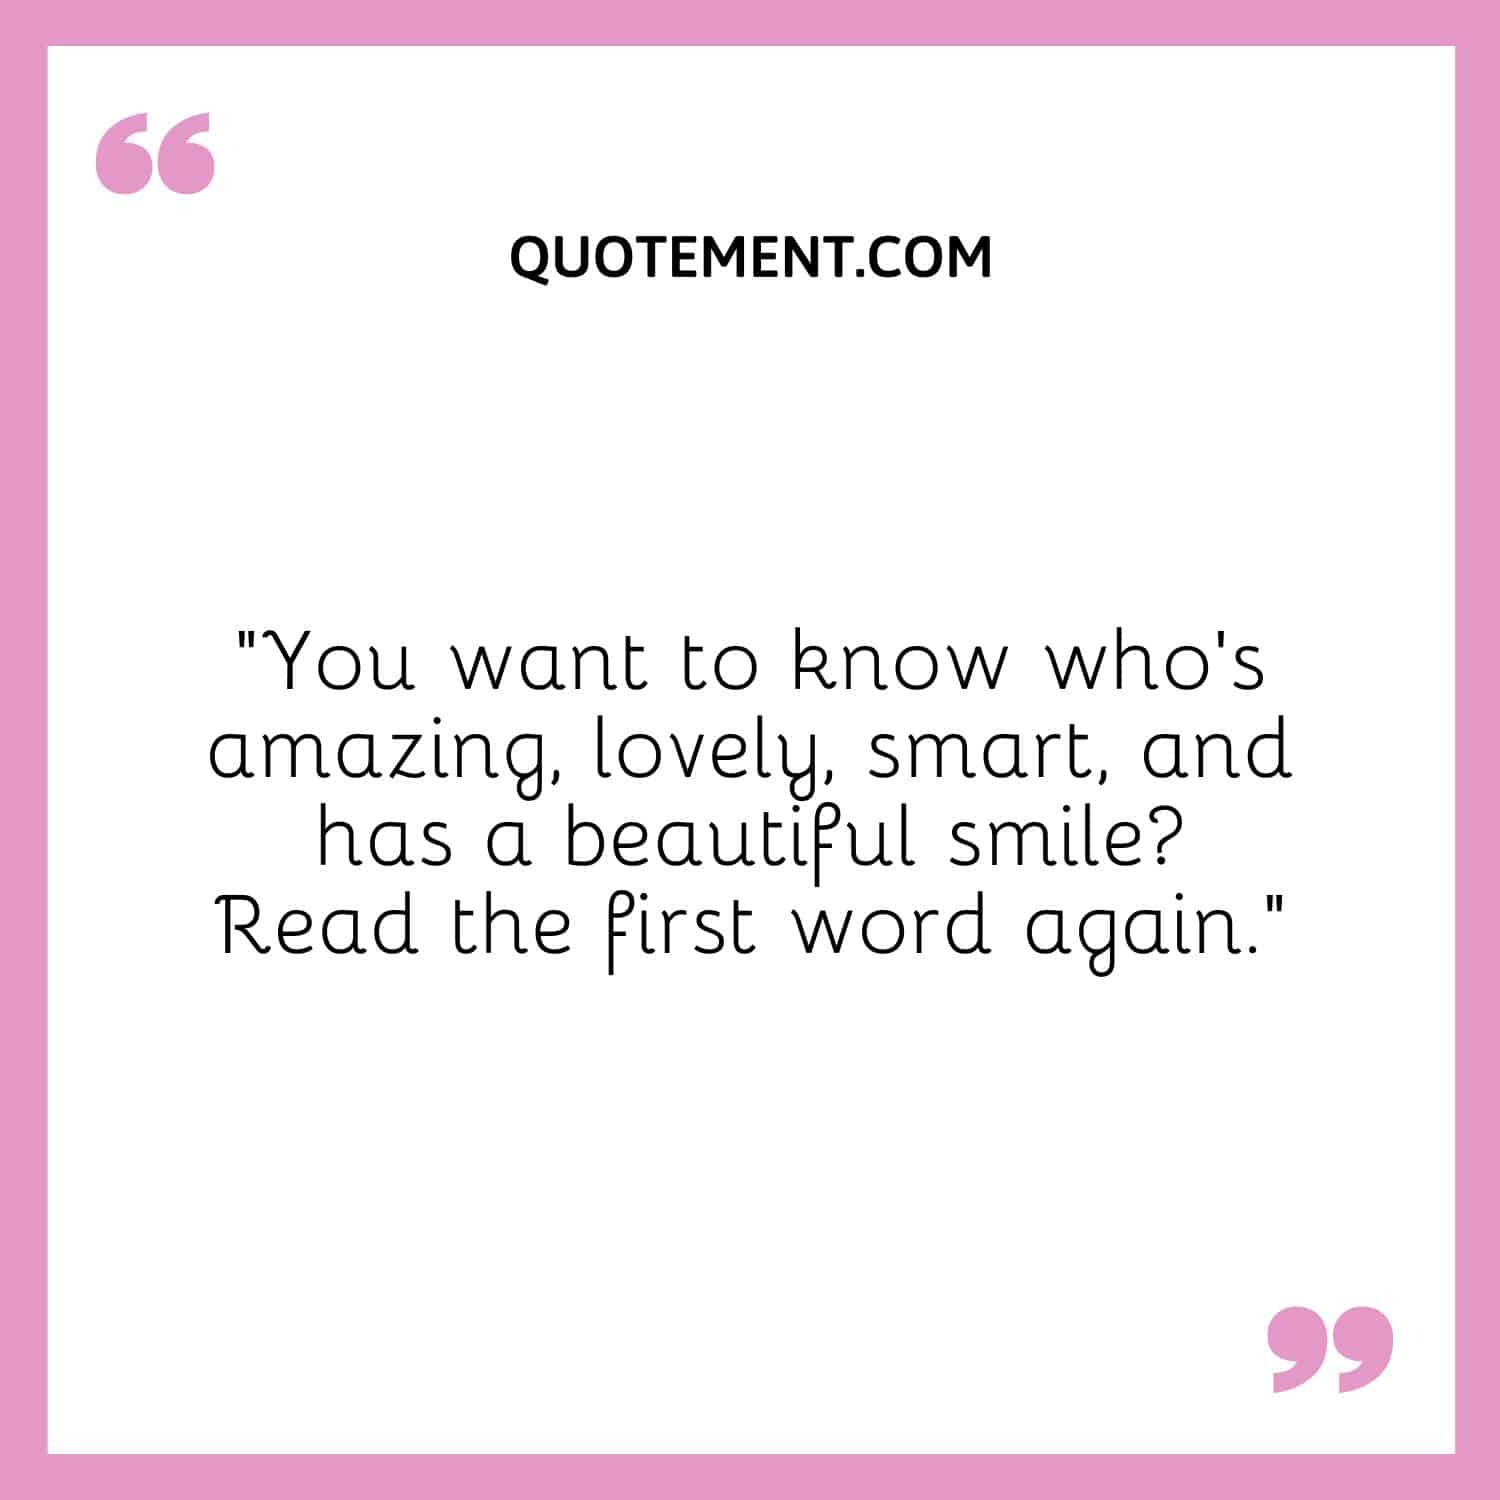 You want to know who’s amazing, lovely, smart, and has a beautiful smile Read the first word again